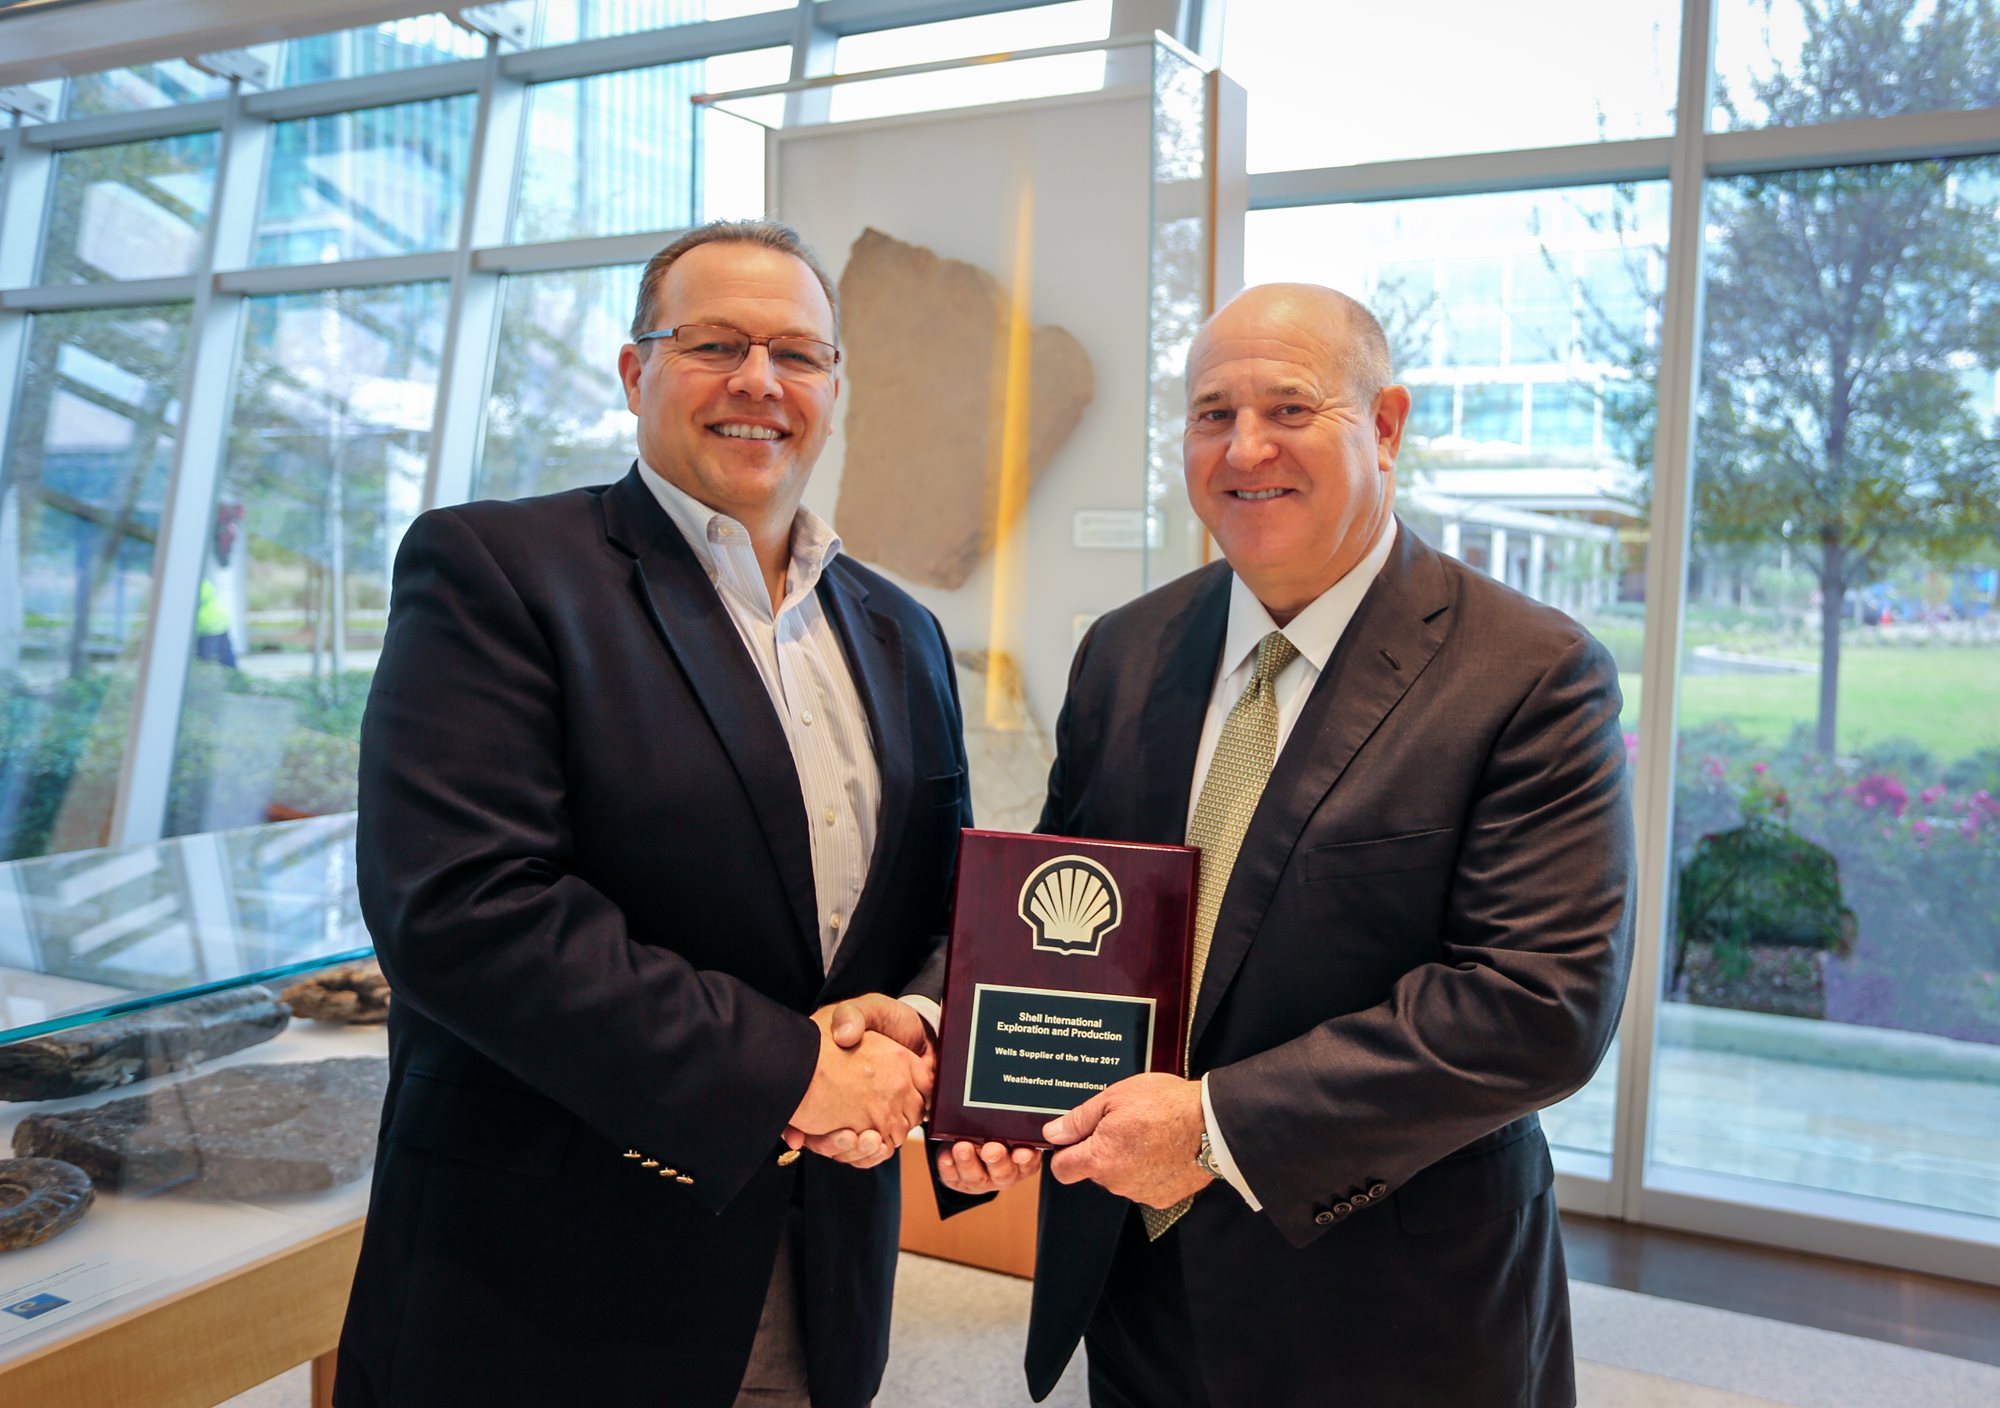 Weatherford President and Chief Executive Officer Mark A. McCollum accepted the 2017 Shell Wells Supplier of the Year award from Paul Goodfellow, Shell Executive Vice President, Wells.